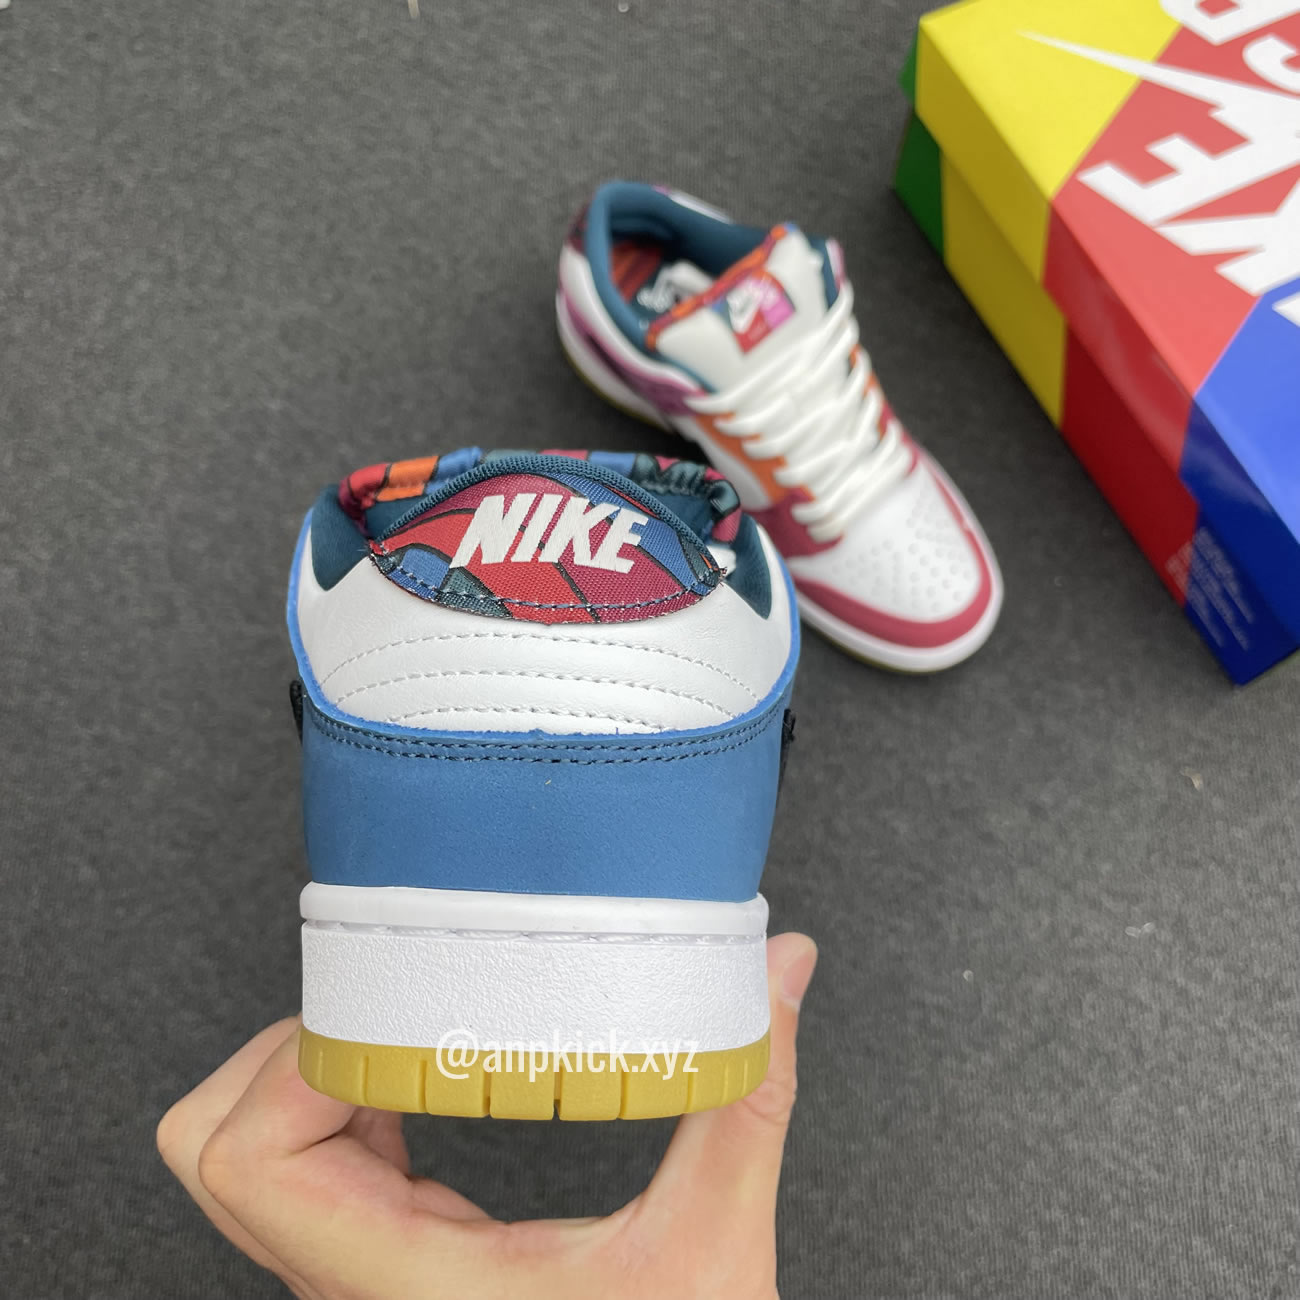 Parra Nike Sb Dunk Low Collab Summer 2021 Colorway Surfaces Dh7695 100 (3) - newkick.org